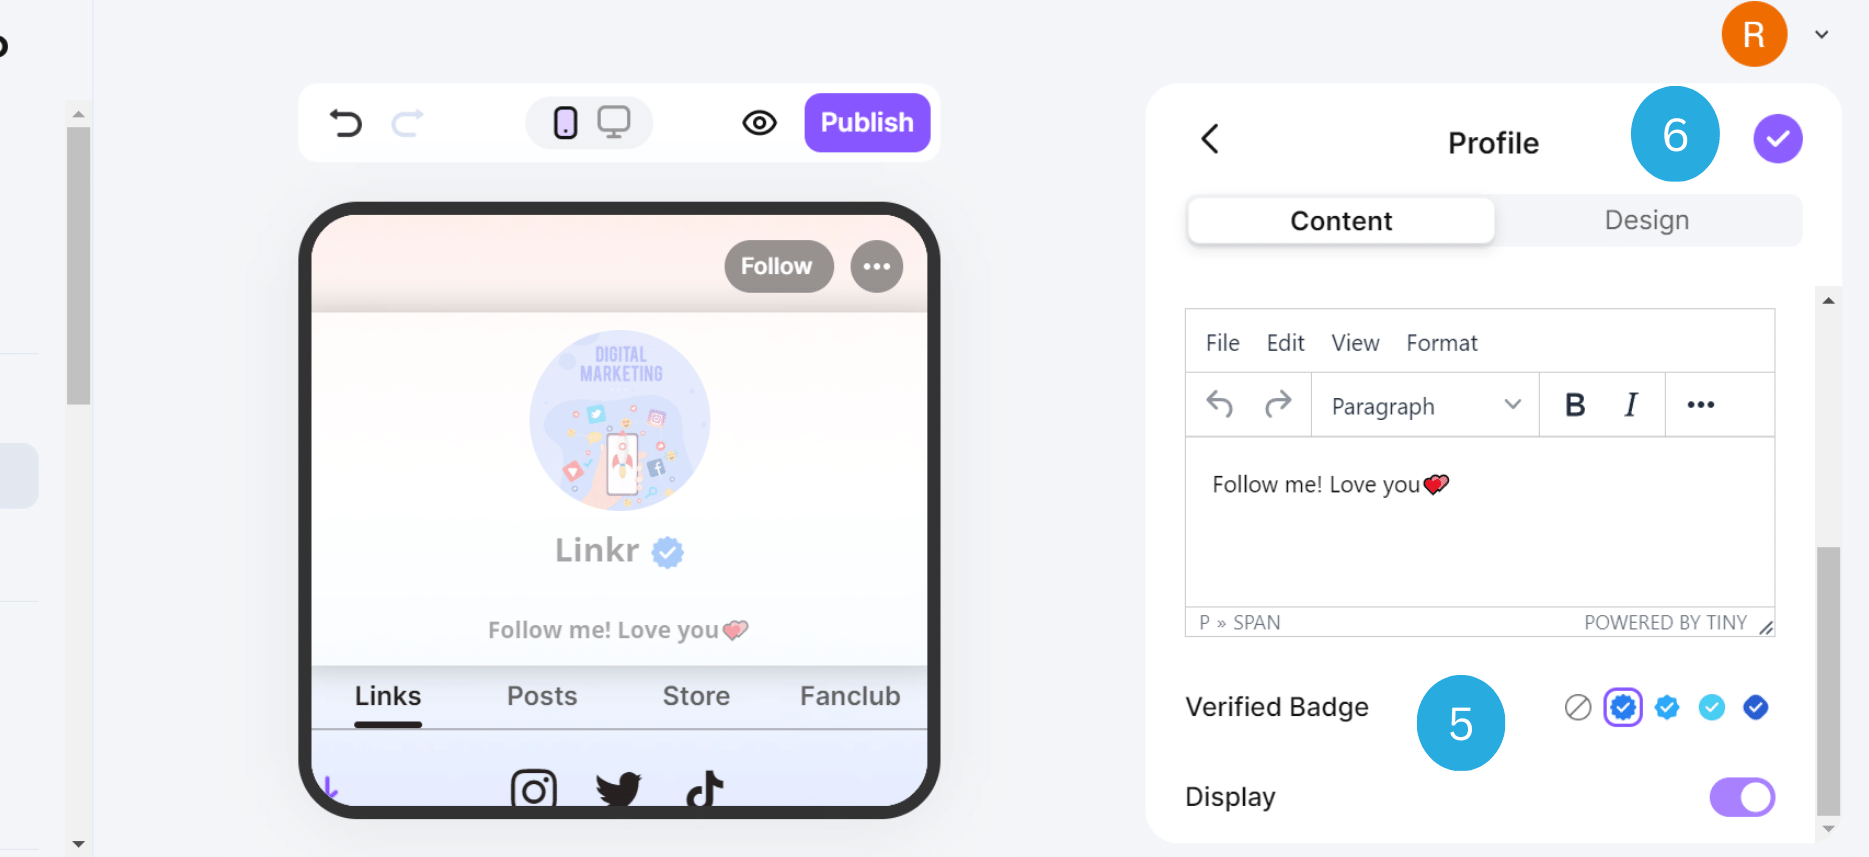 Add Verified Badge to Your Linkr Account